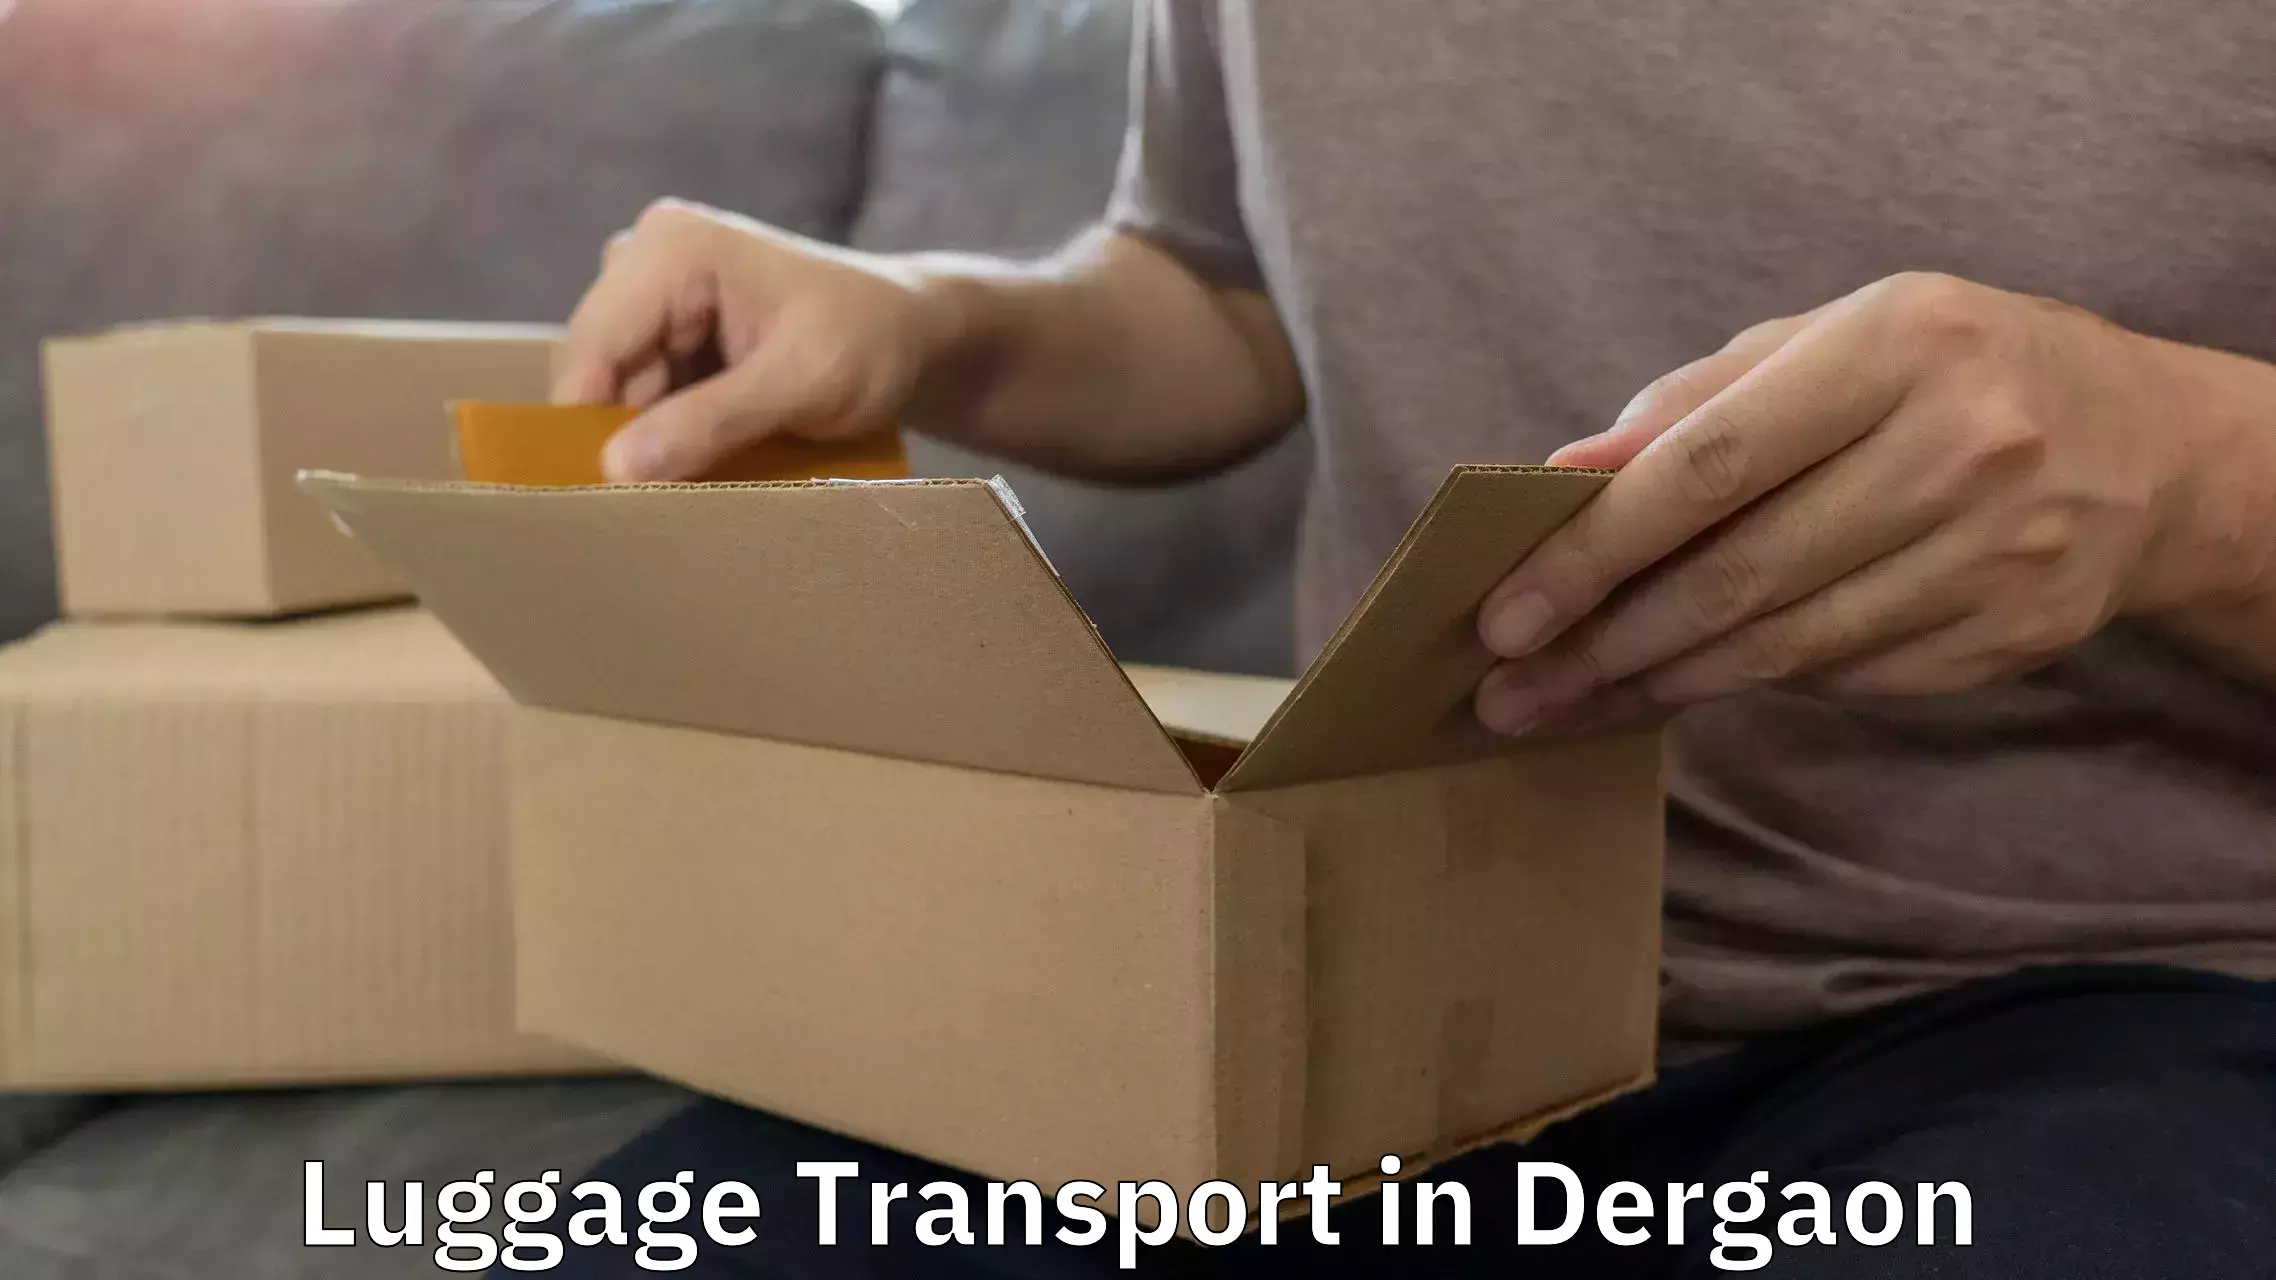 Personal effects shipping in Dergaon